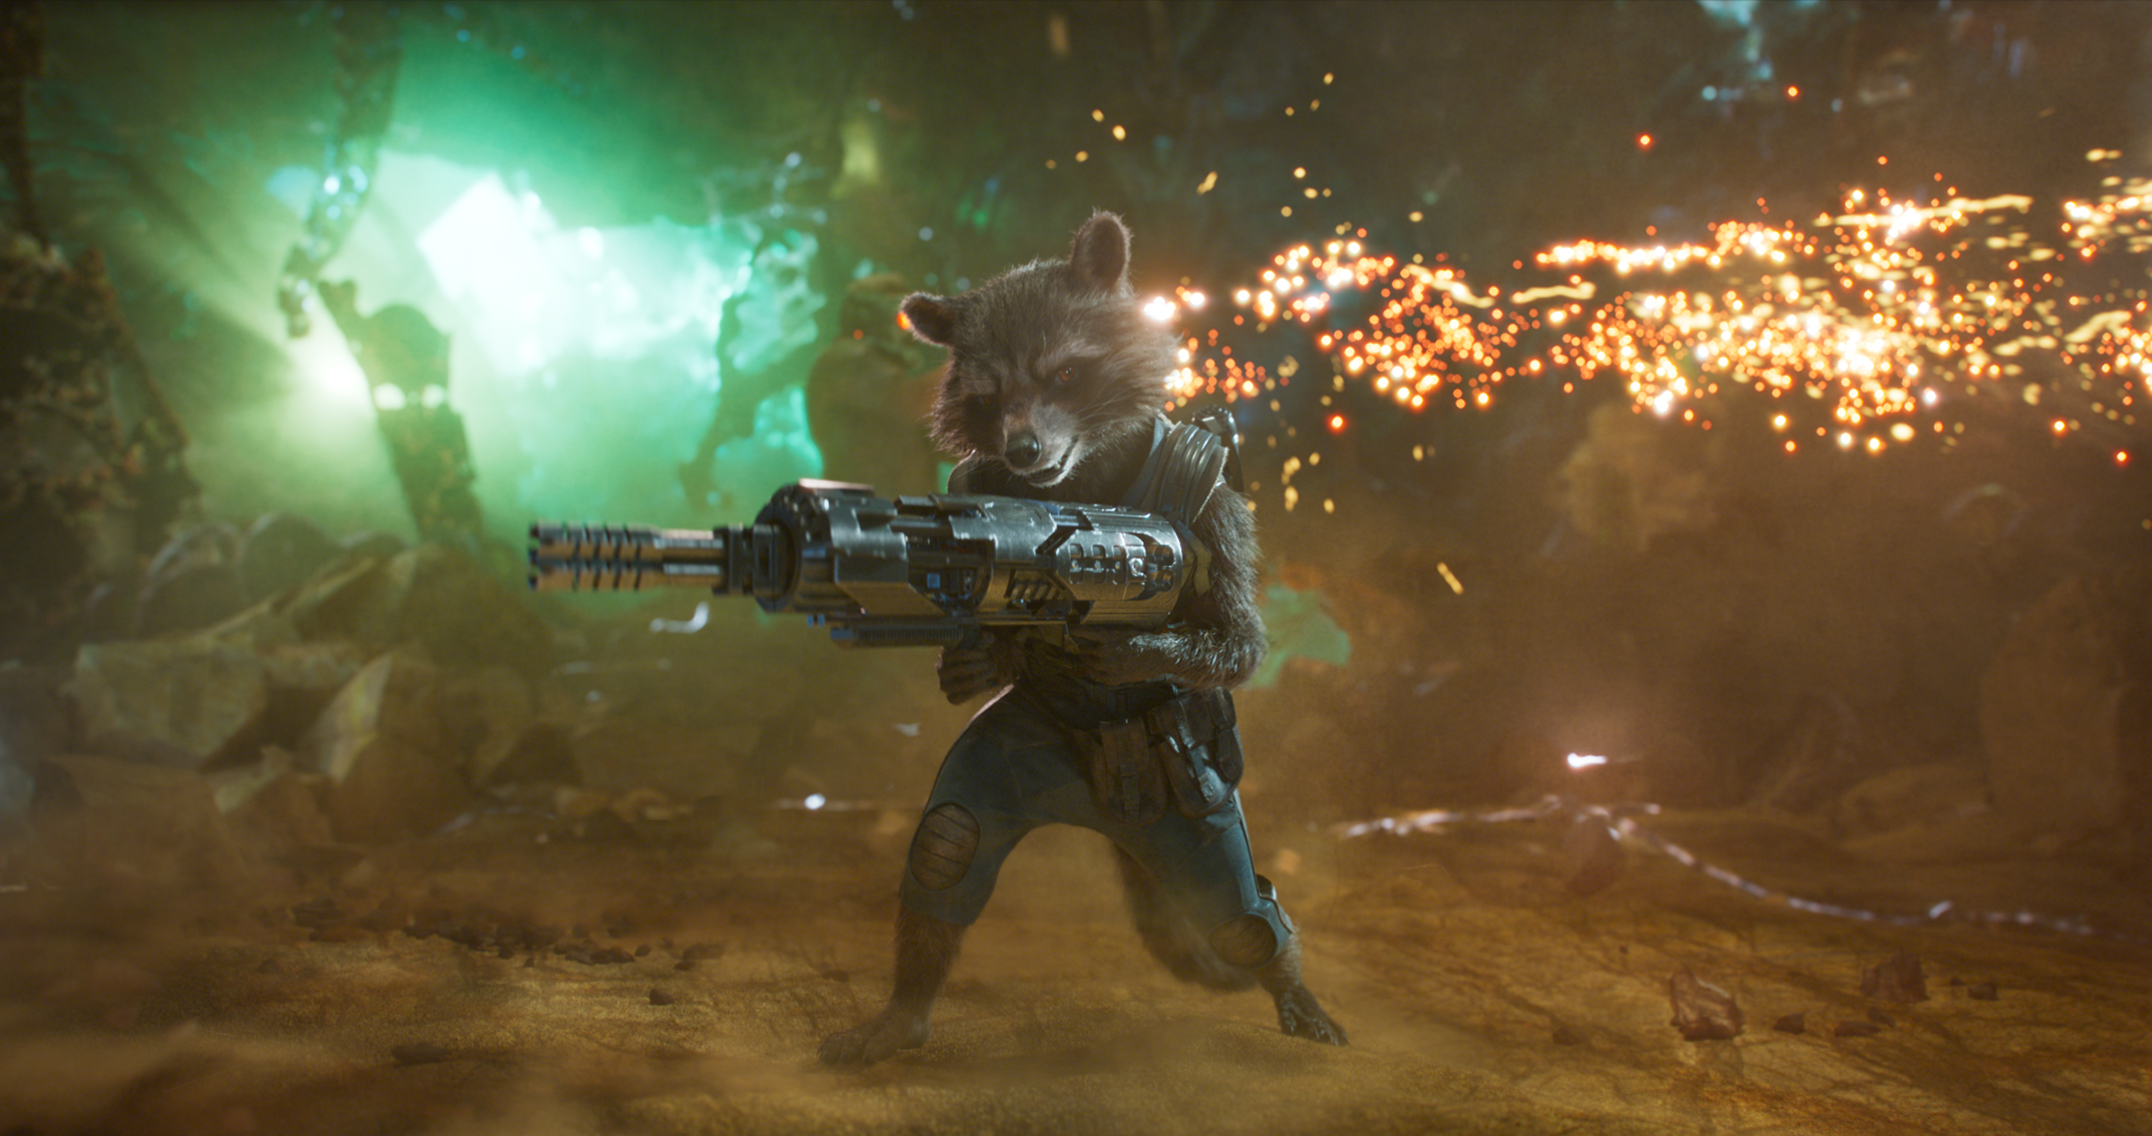 movie guardians of the galaxy vol 2